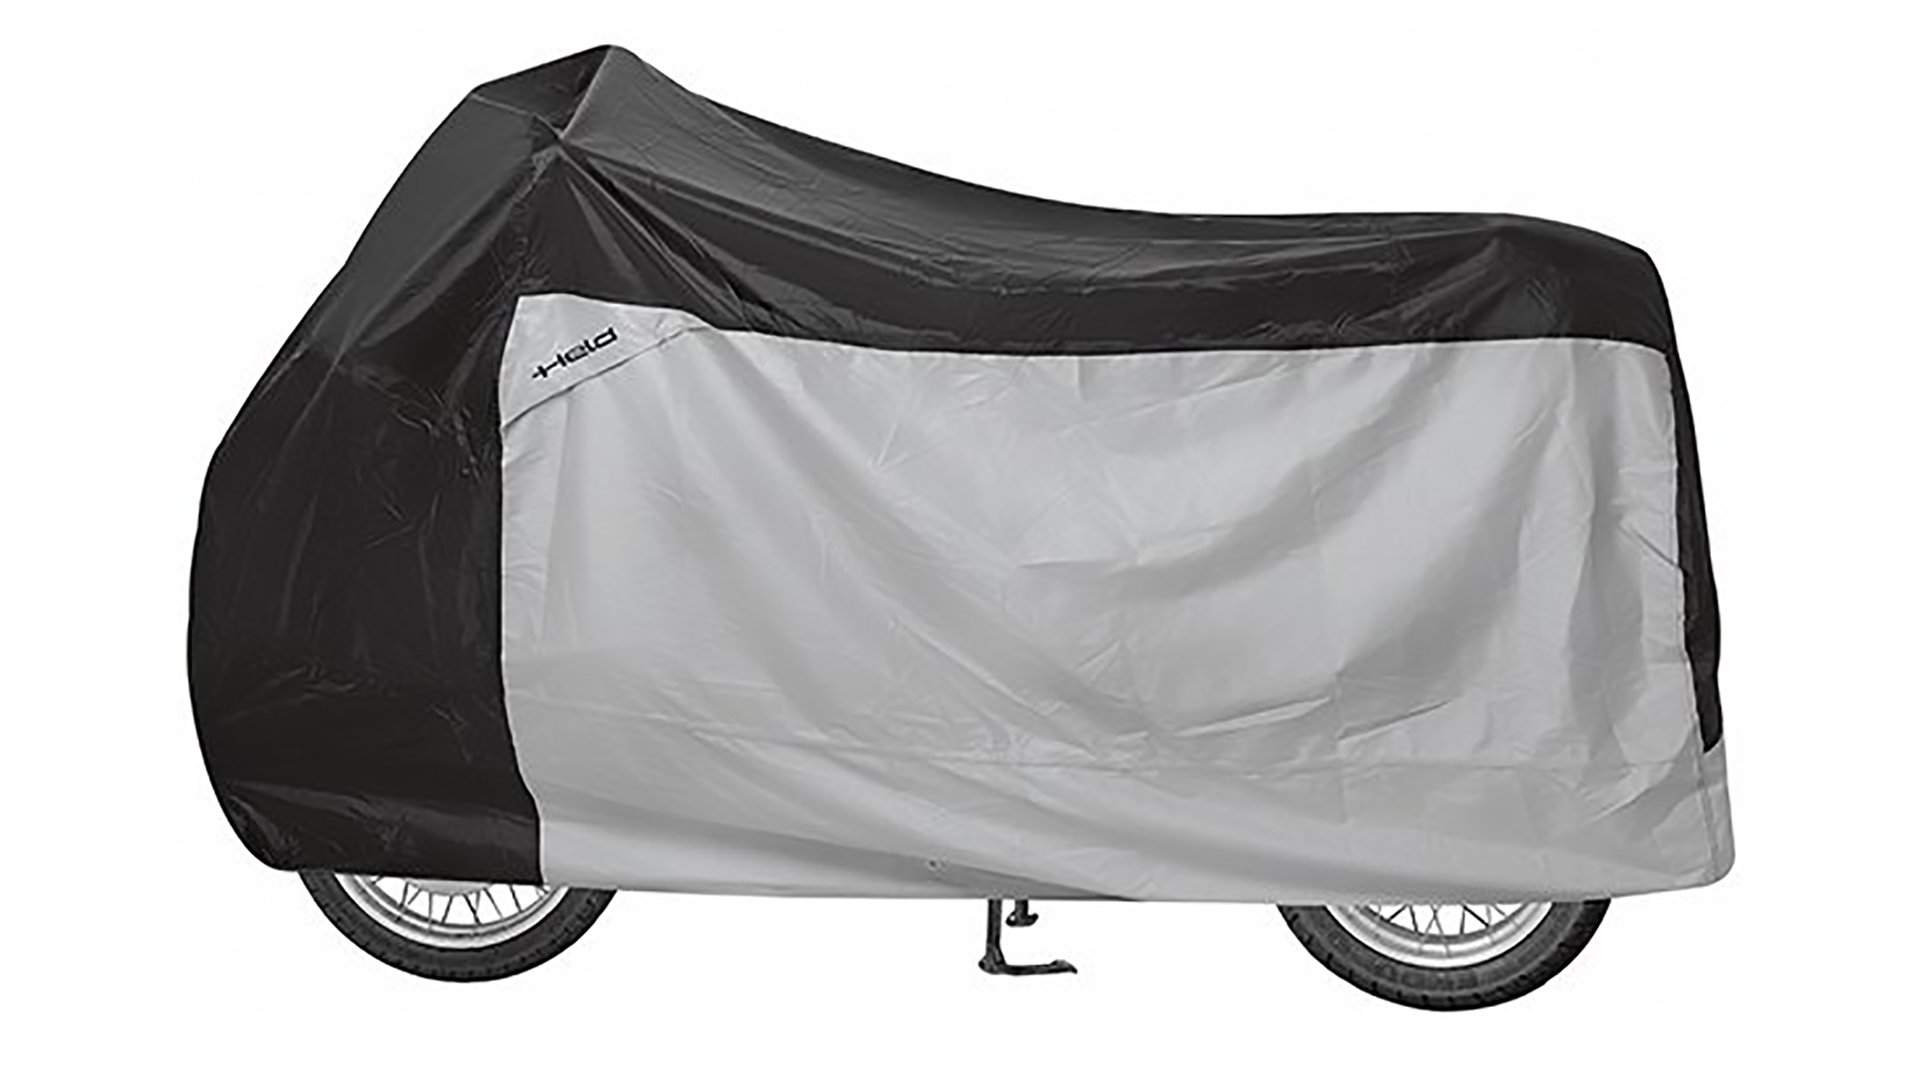 Oxford Rainex - Motorcycle Cover - Review 